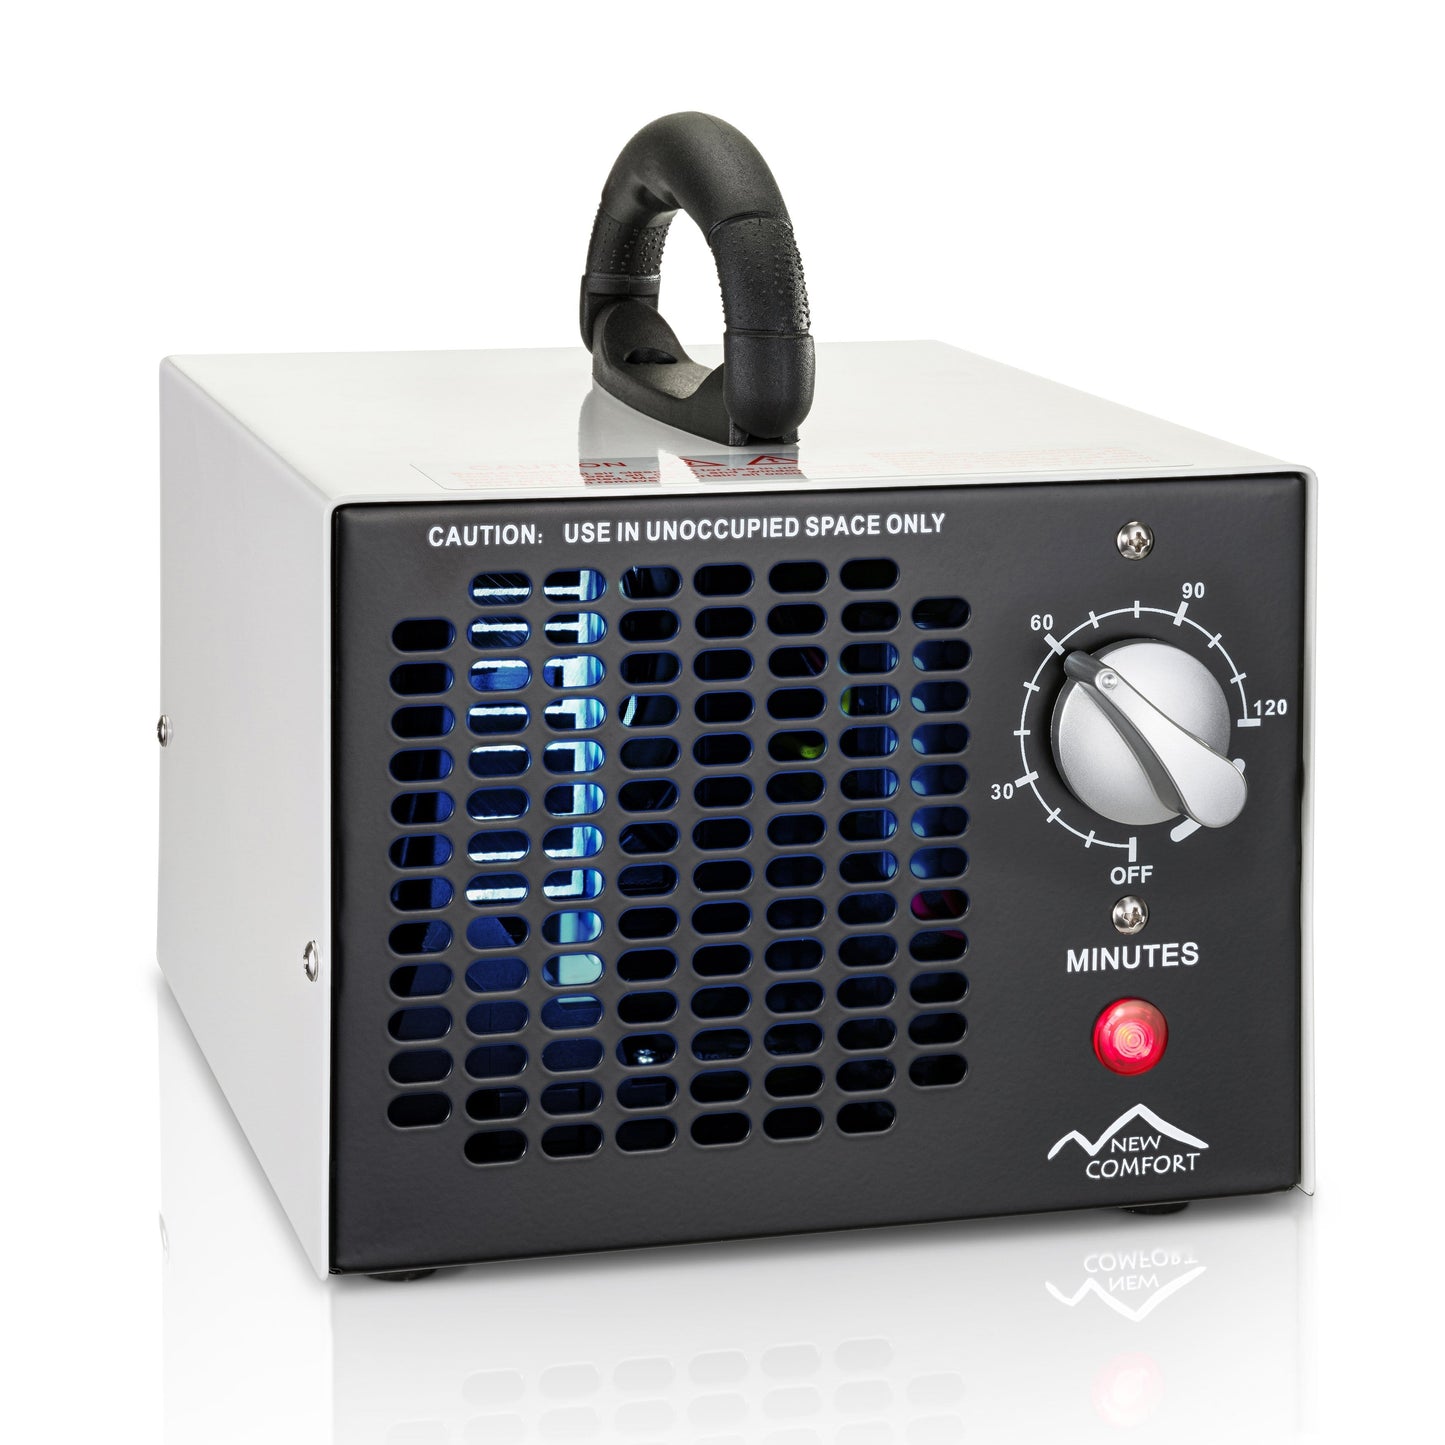 New Comfort Compact Odor Eliminating White Commercial Ozone Generator by Prolux